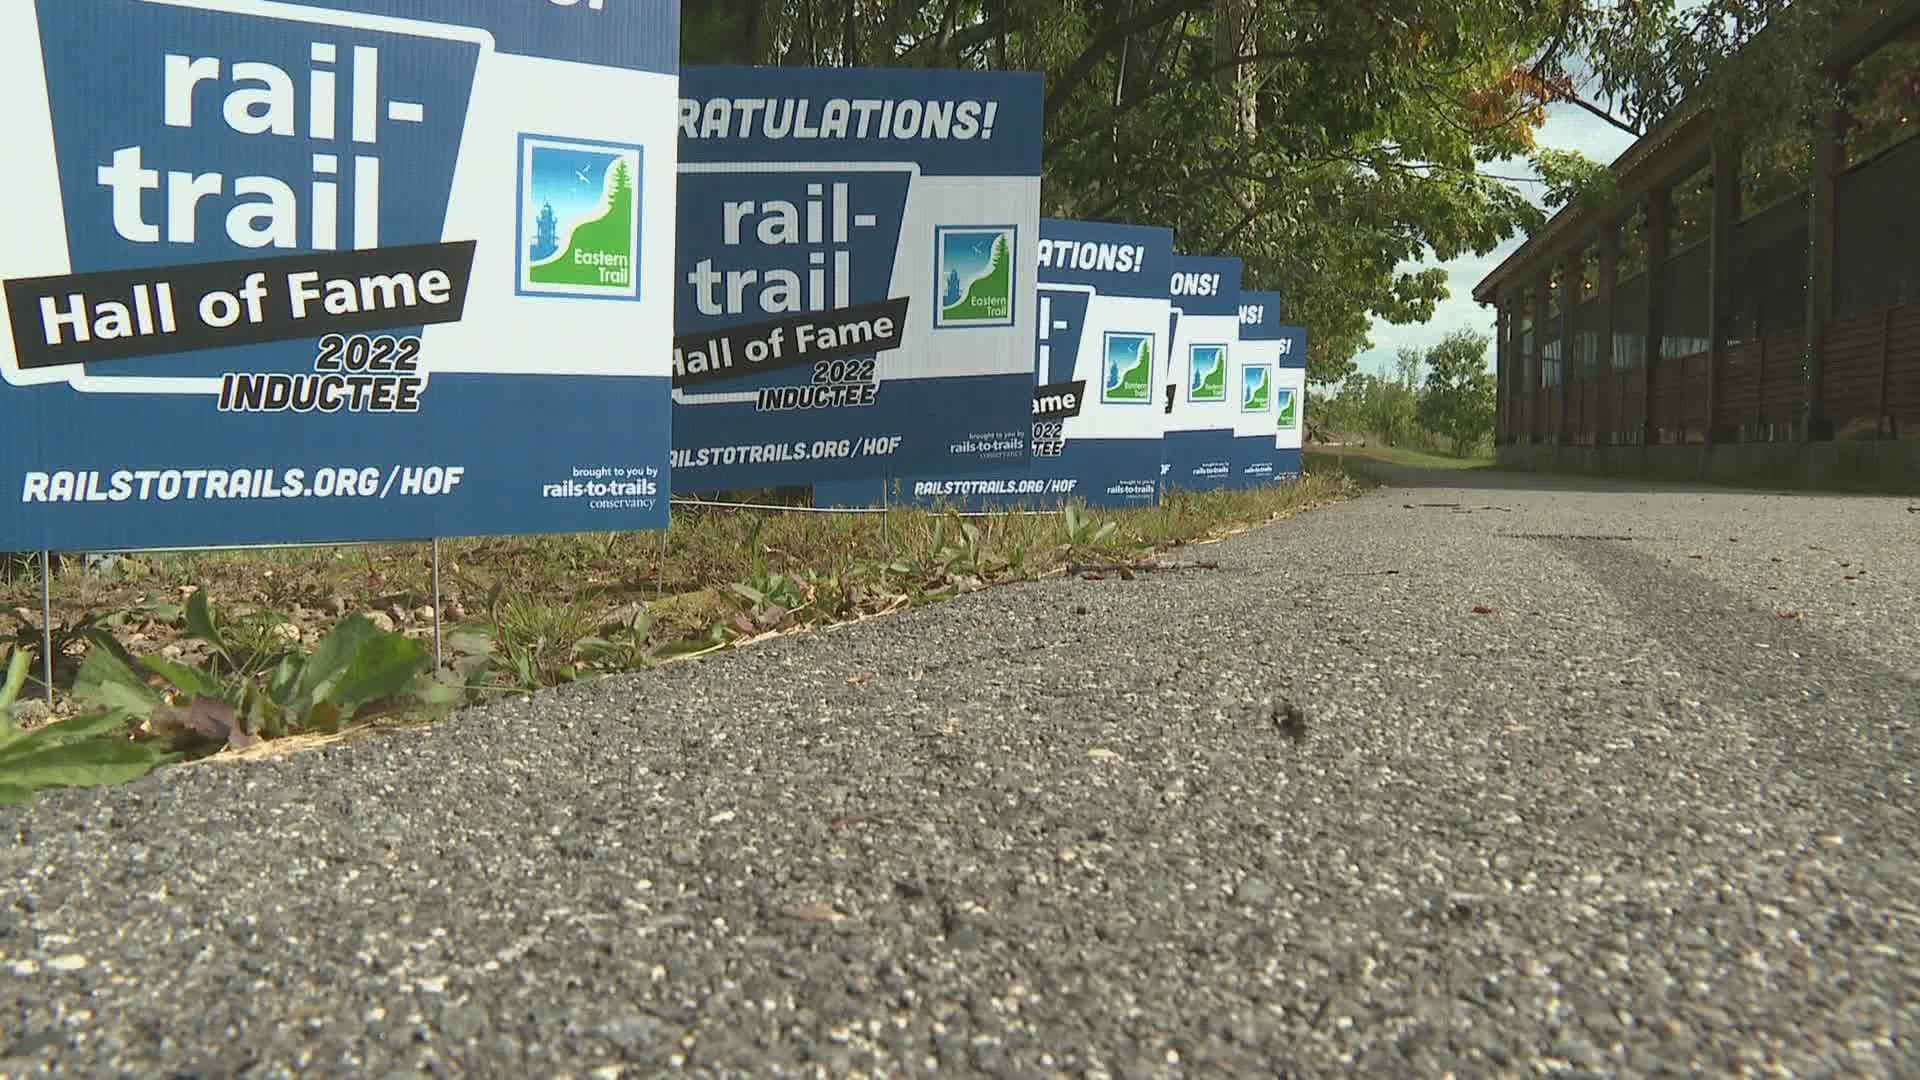 The Eastern Trail, which runs through 12 southern Maine towns, was inducted into the Rail-Trail Hall of Fame Friday morning.